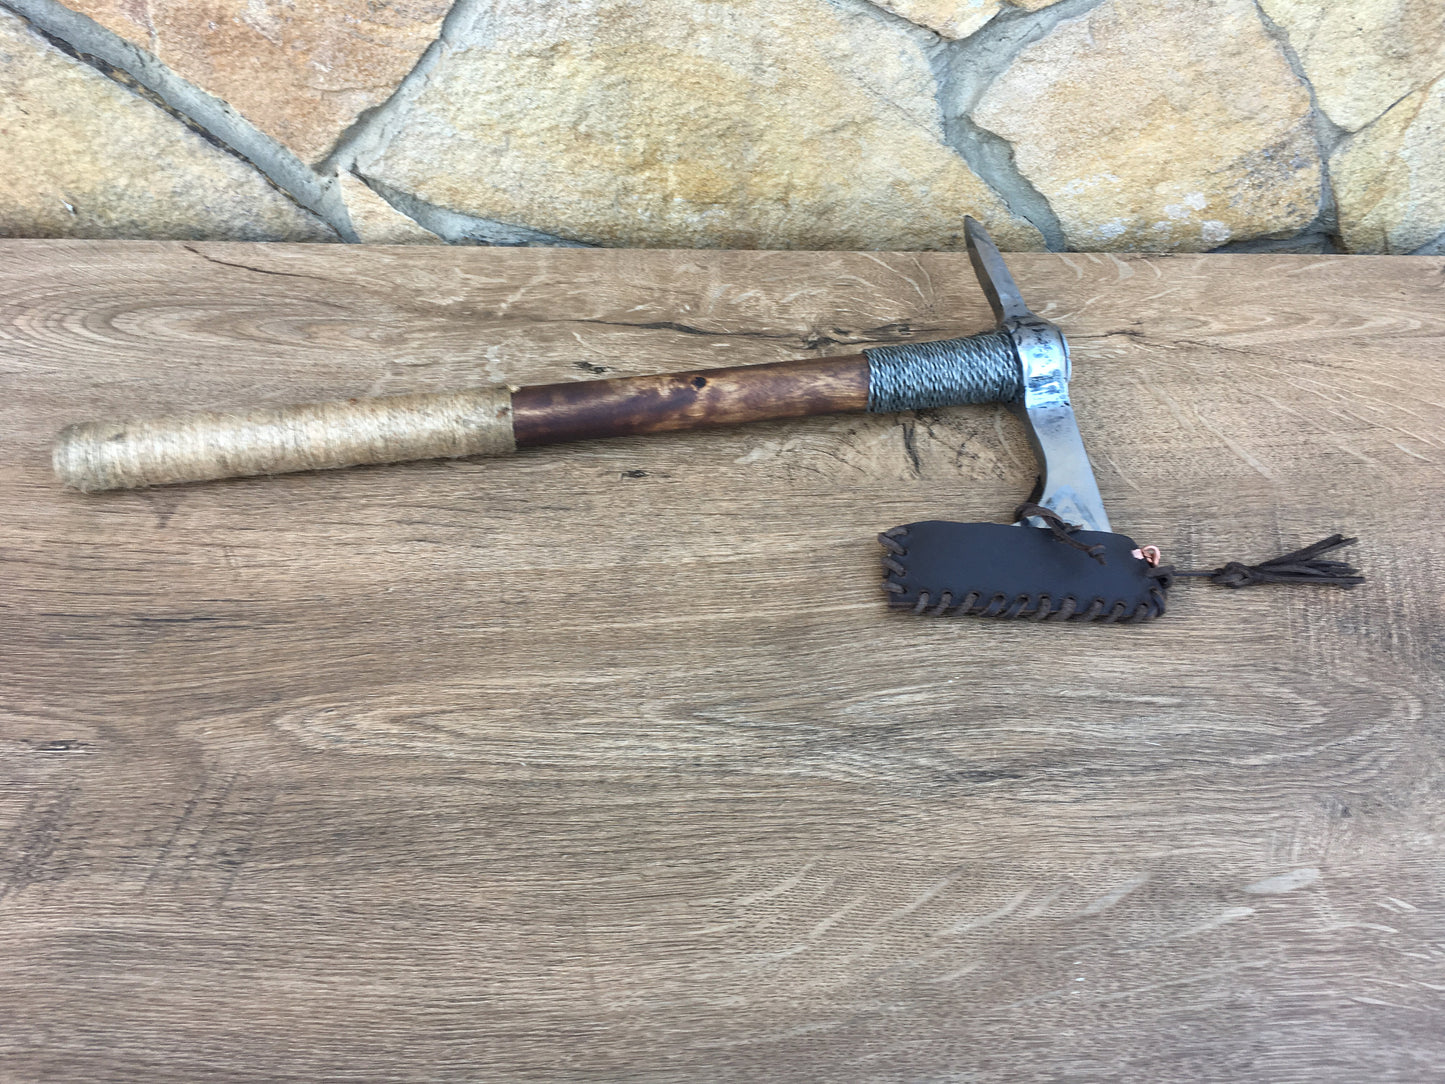 Mens gifts, viking axe, mens gift, tomahawk, man gifts, handyman tool, manly gift, axe, gifts for men, bearded axe, gifts for man, Kratos